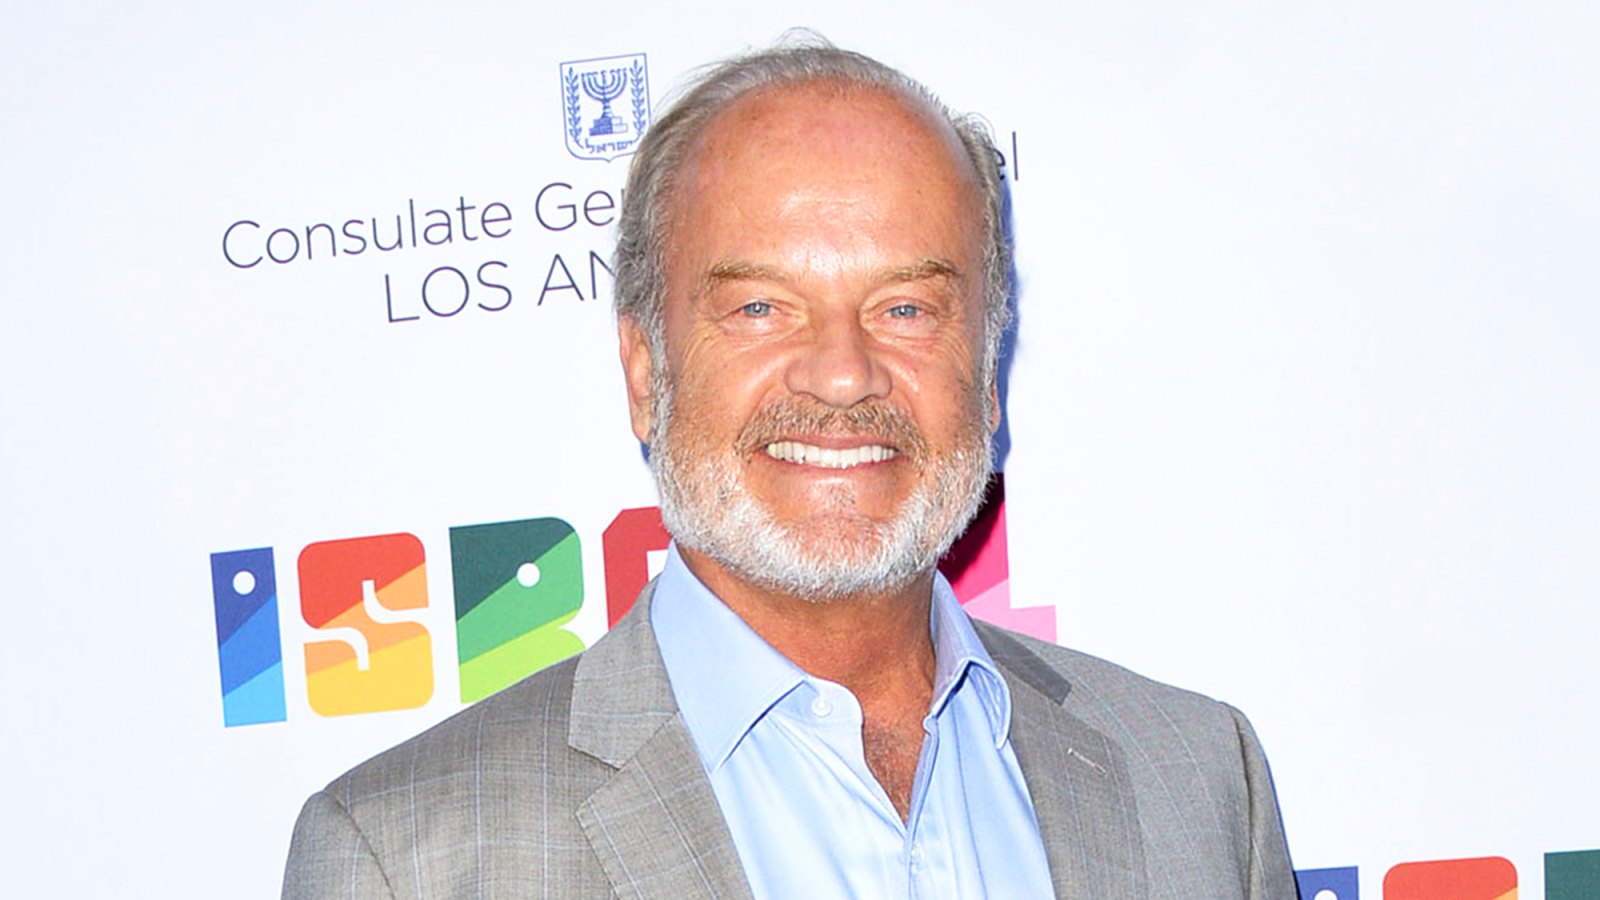 Kelsey Grammer attends a private celebration of The 70th Anniversary of Israel hosted by the Consul General of Israel on June 10, 2018 in Los Angeles, California.